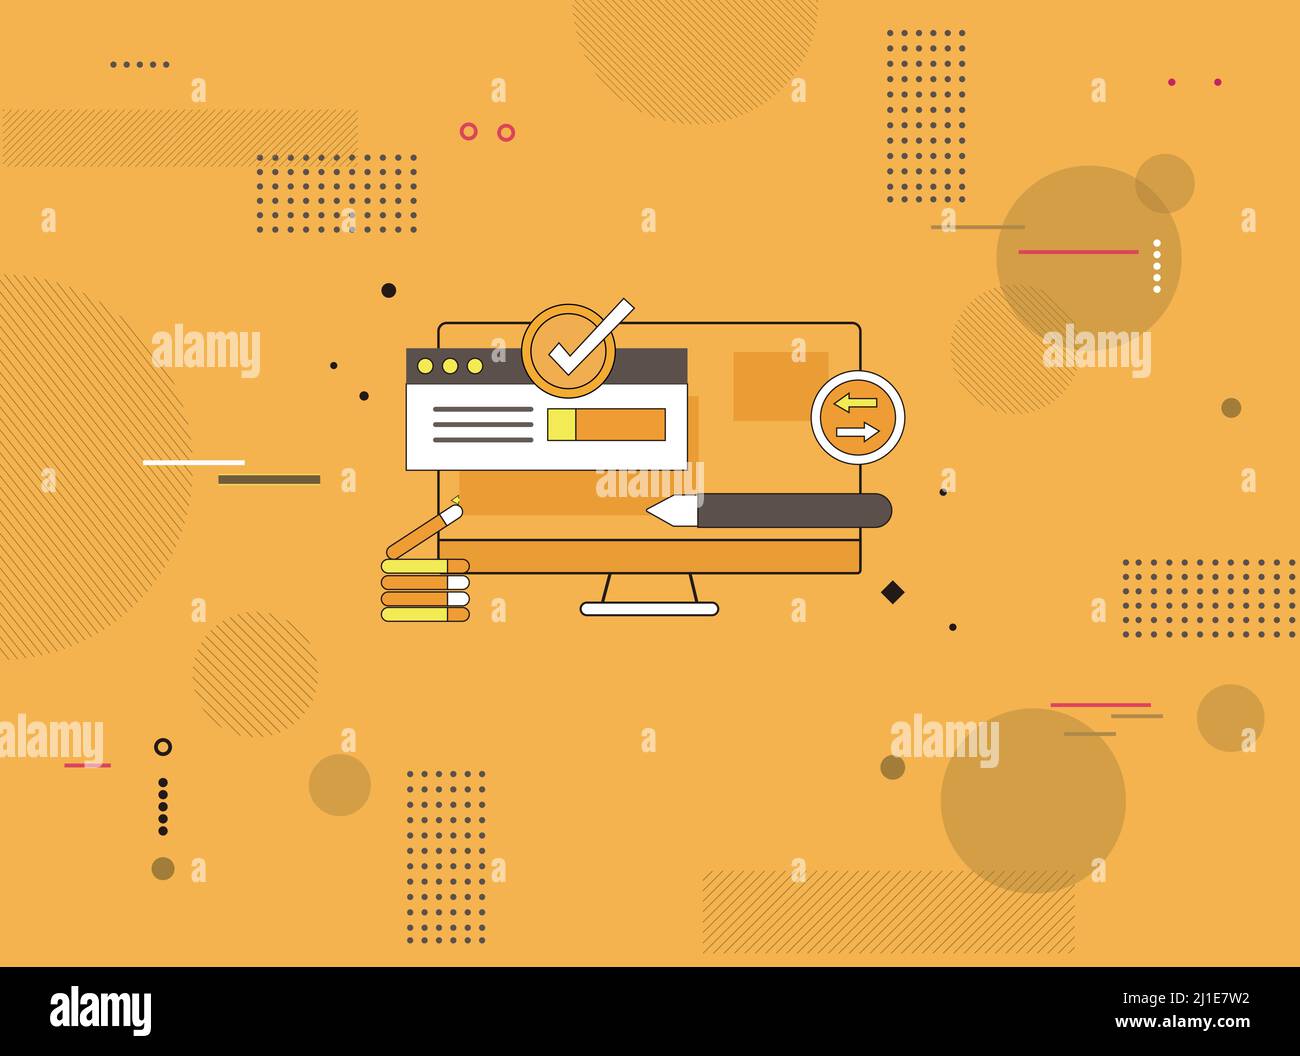 information technology background vector background Stock Vector